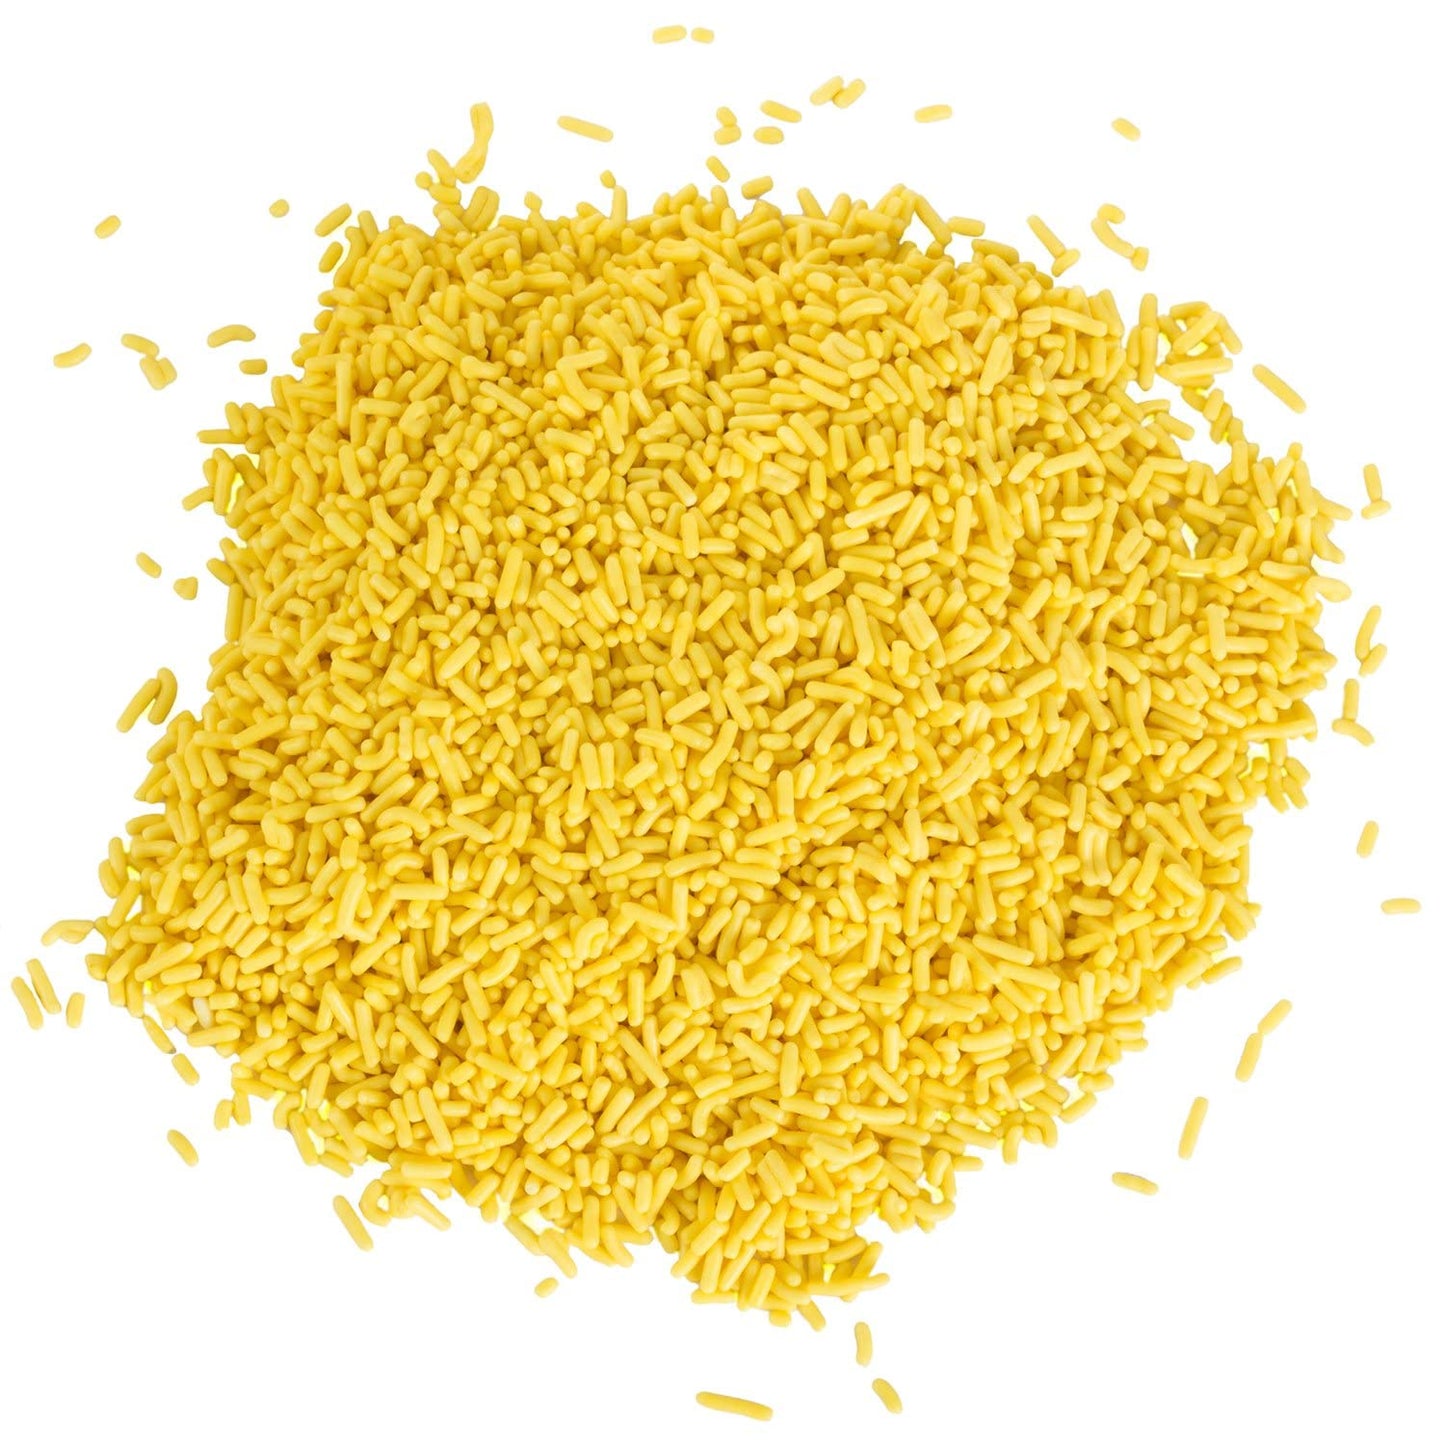 Yellow Sprinkles - 1.6 LB Bulk Dessert Toppings - Colorful Jimmies for Baking - Yellow Sprinkles in Resealable Container - Spring, Summer Dessert Toppings